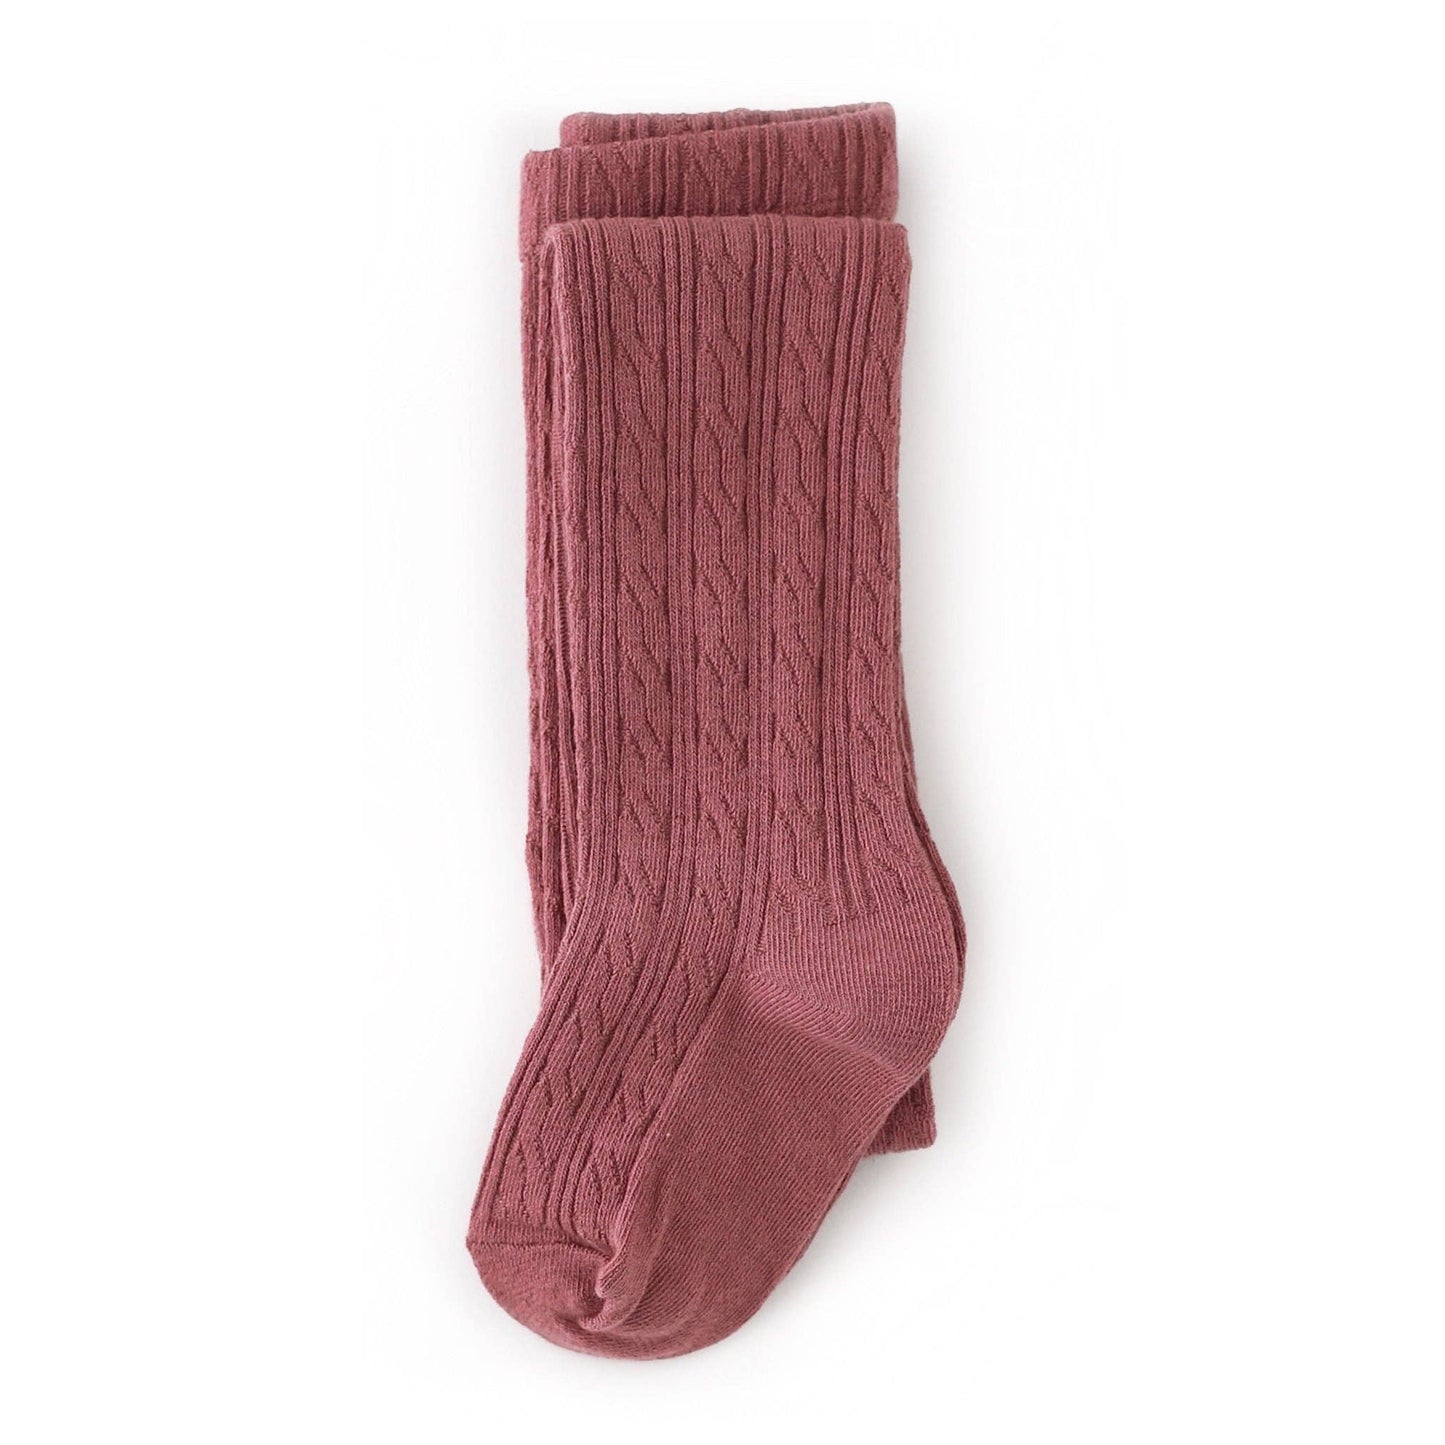 Little Stocking Co. - Mauve Rose Cable Knit Tights